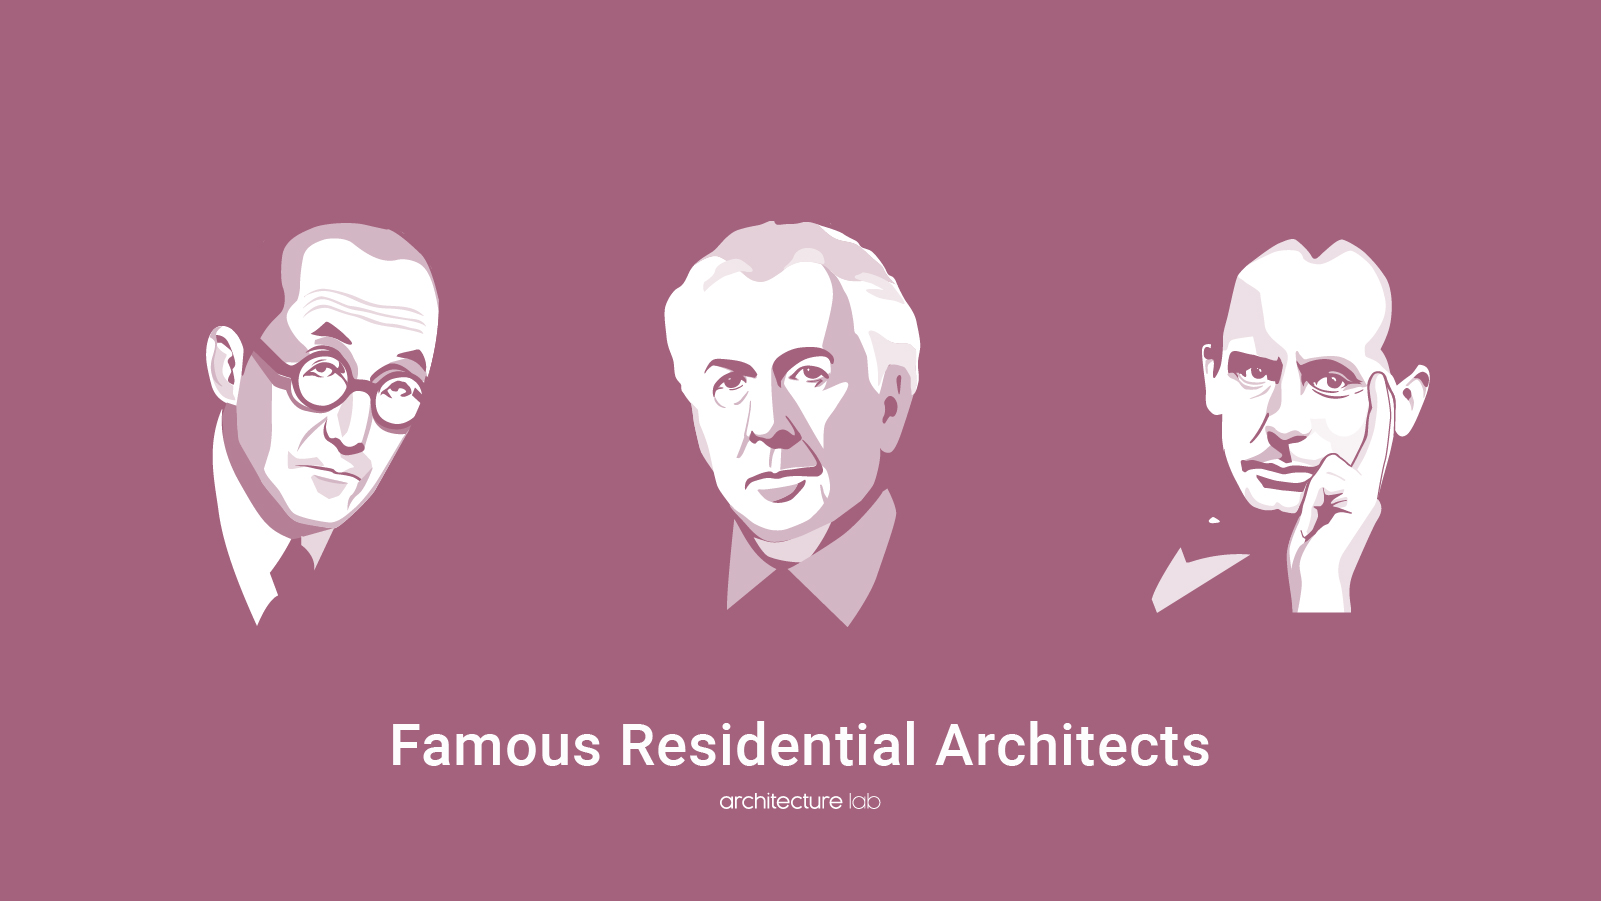 Famous residential architects and their proud works